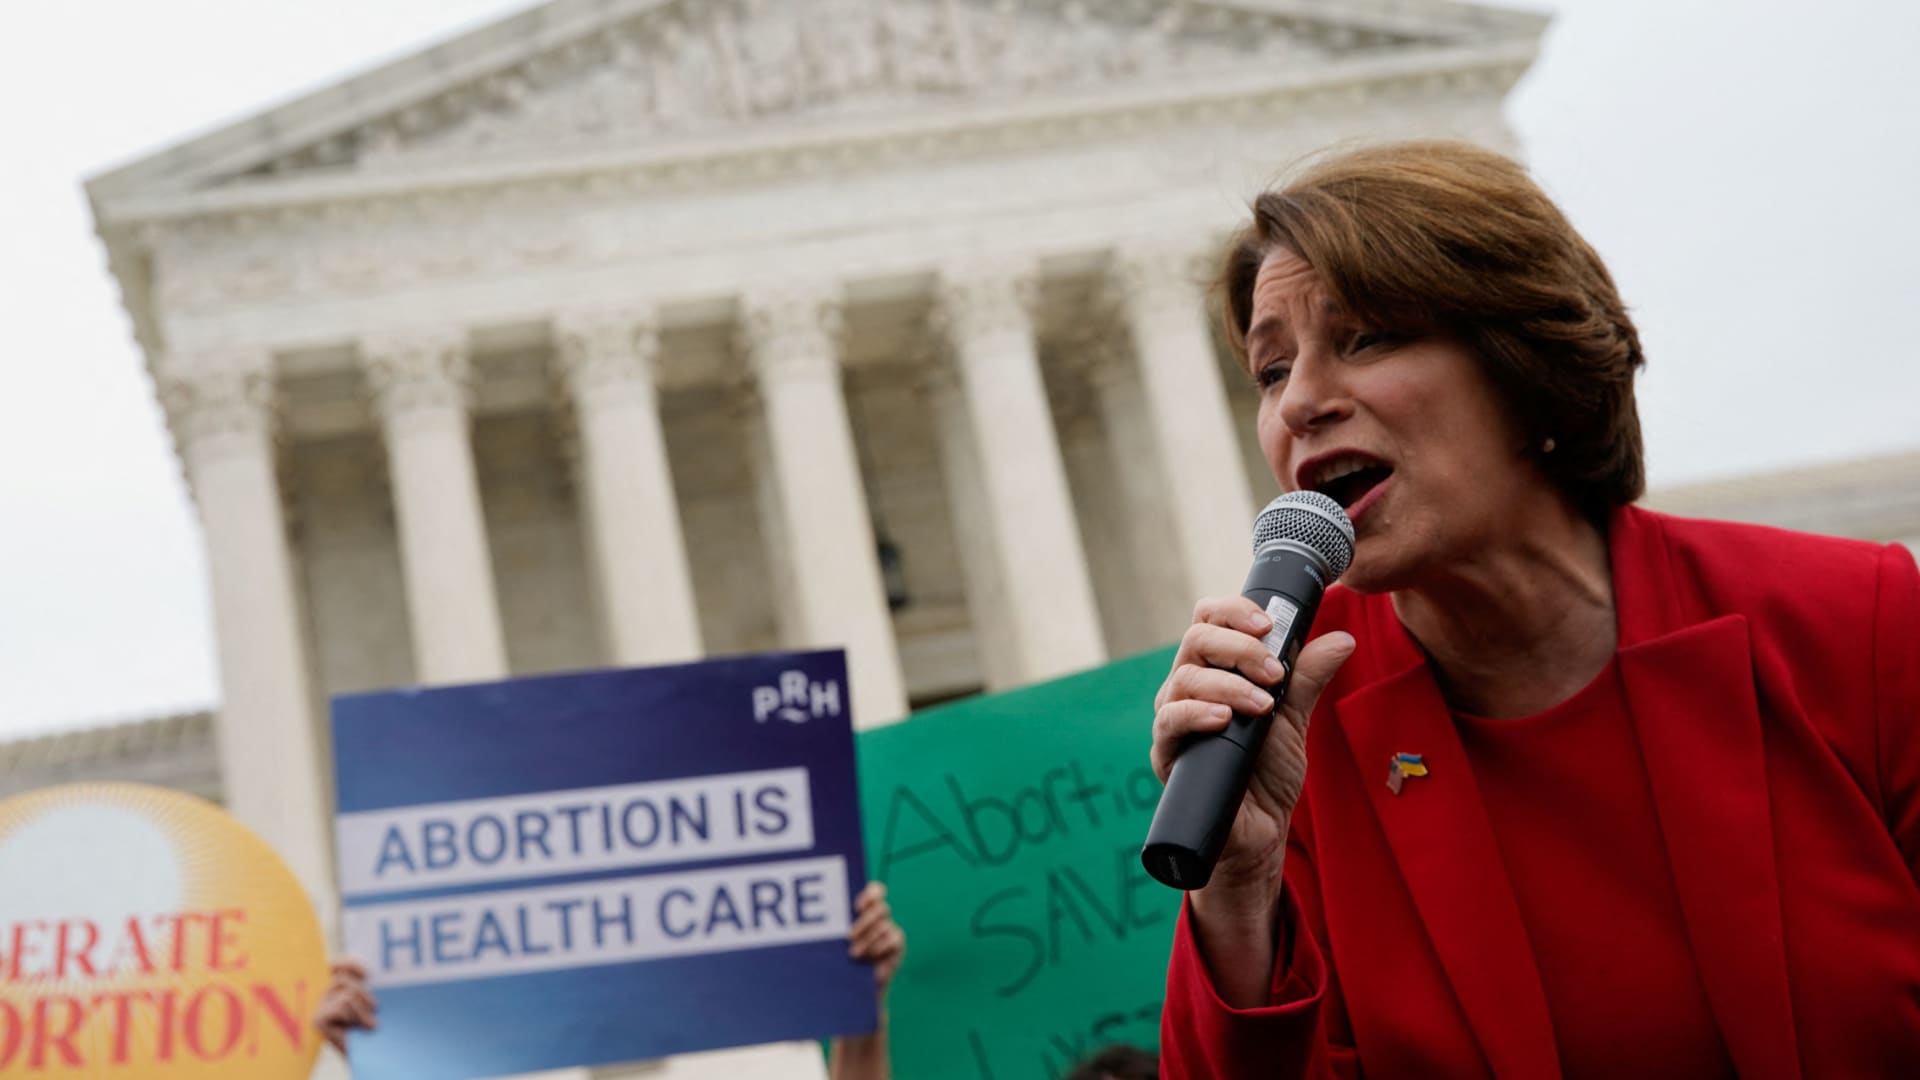 Democratic senators concerned about phone location data being used to track people seeking abortions